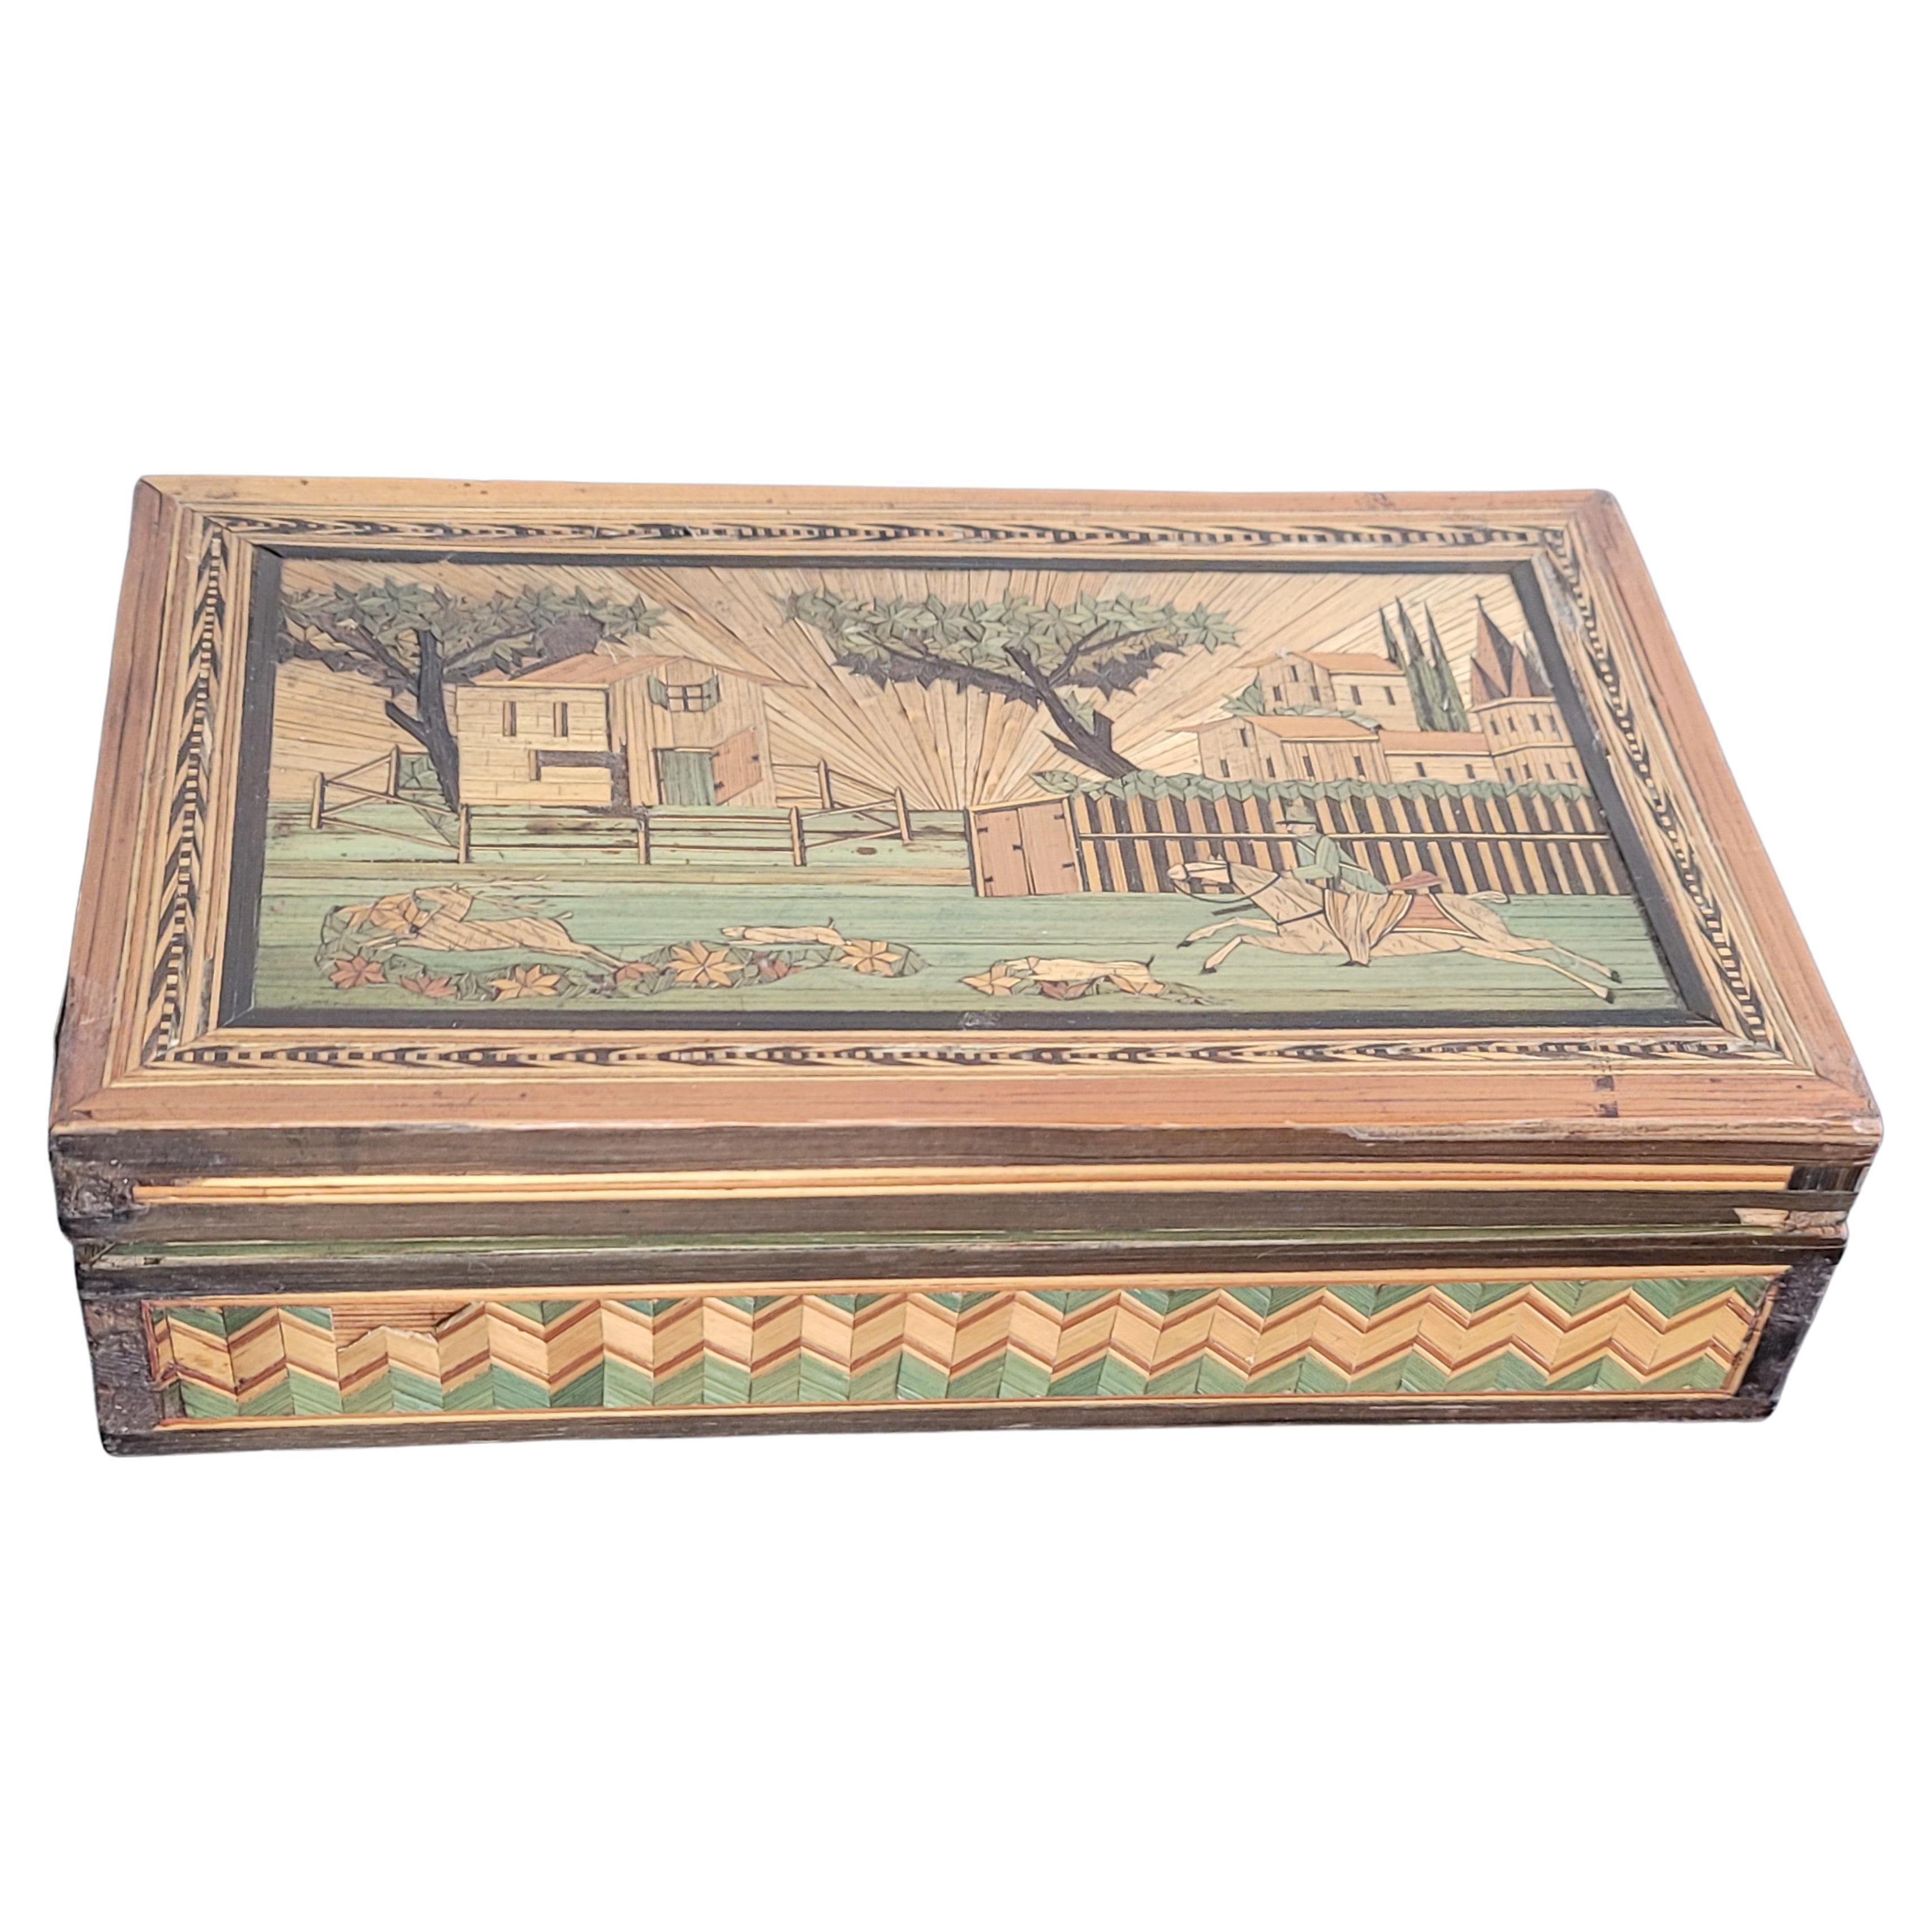 Rare Late 18th/Early 19th Century French Colored Straw Marquetry Sewing Box For Sale